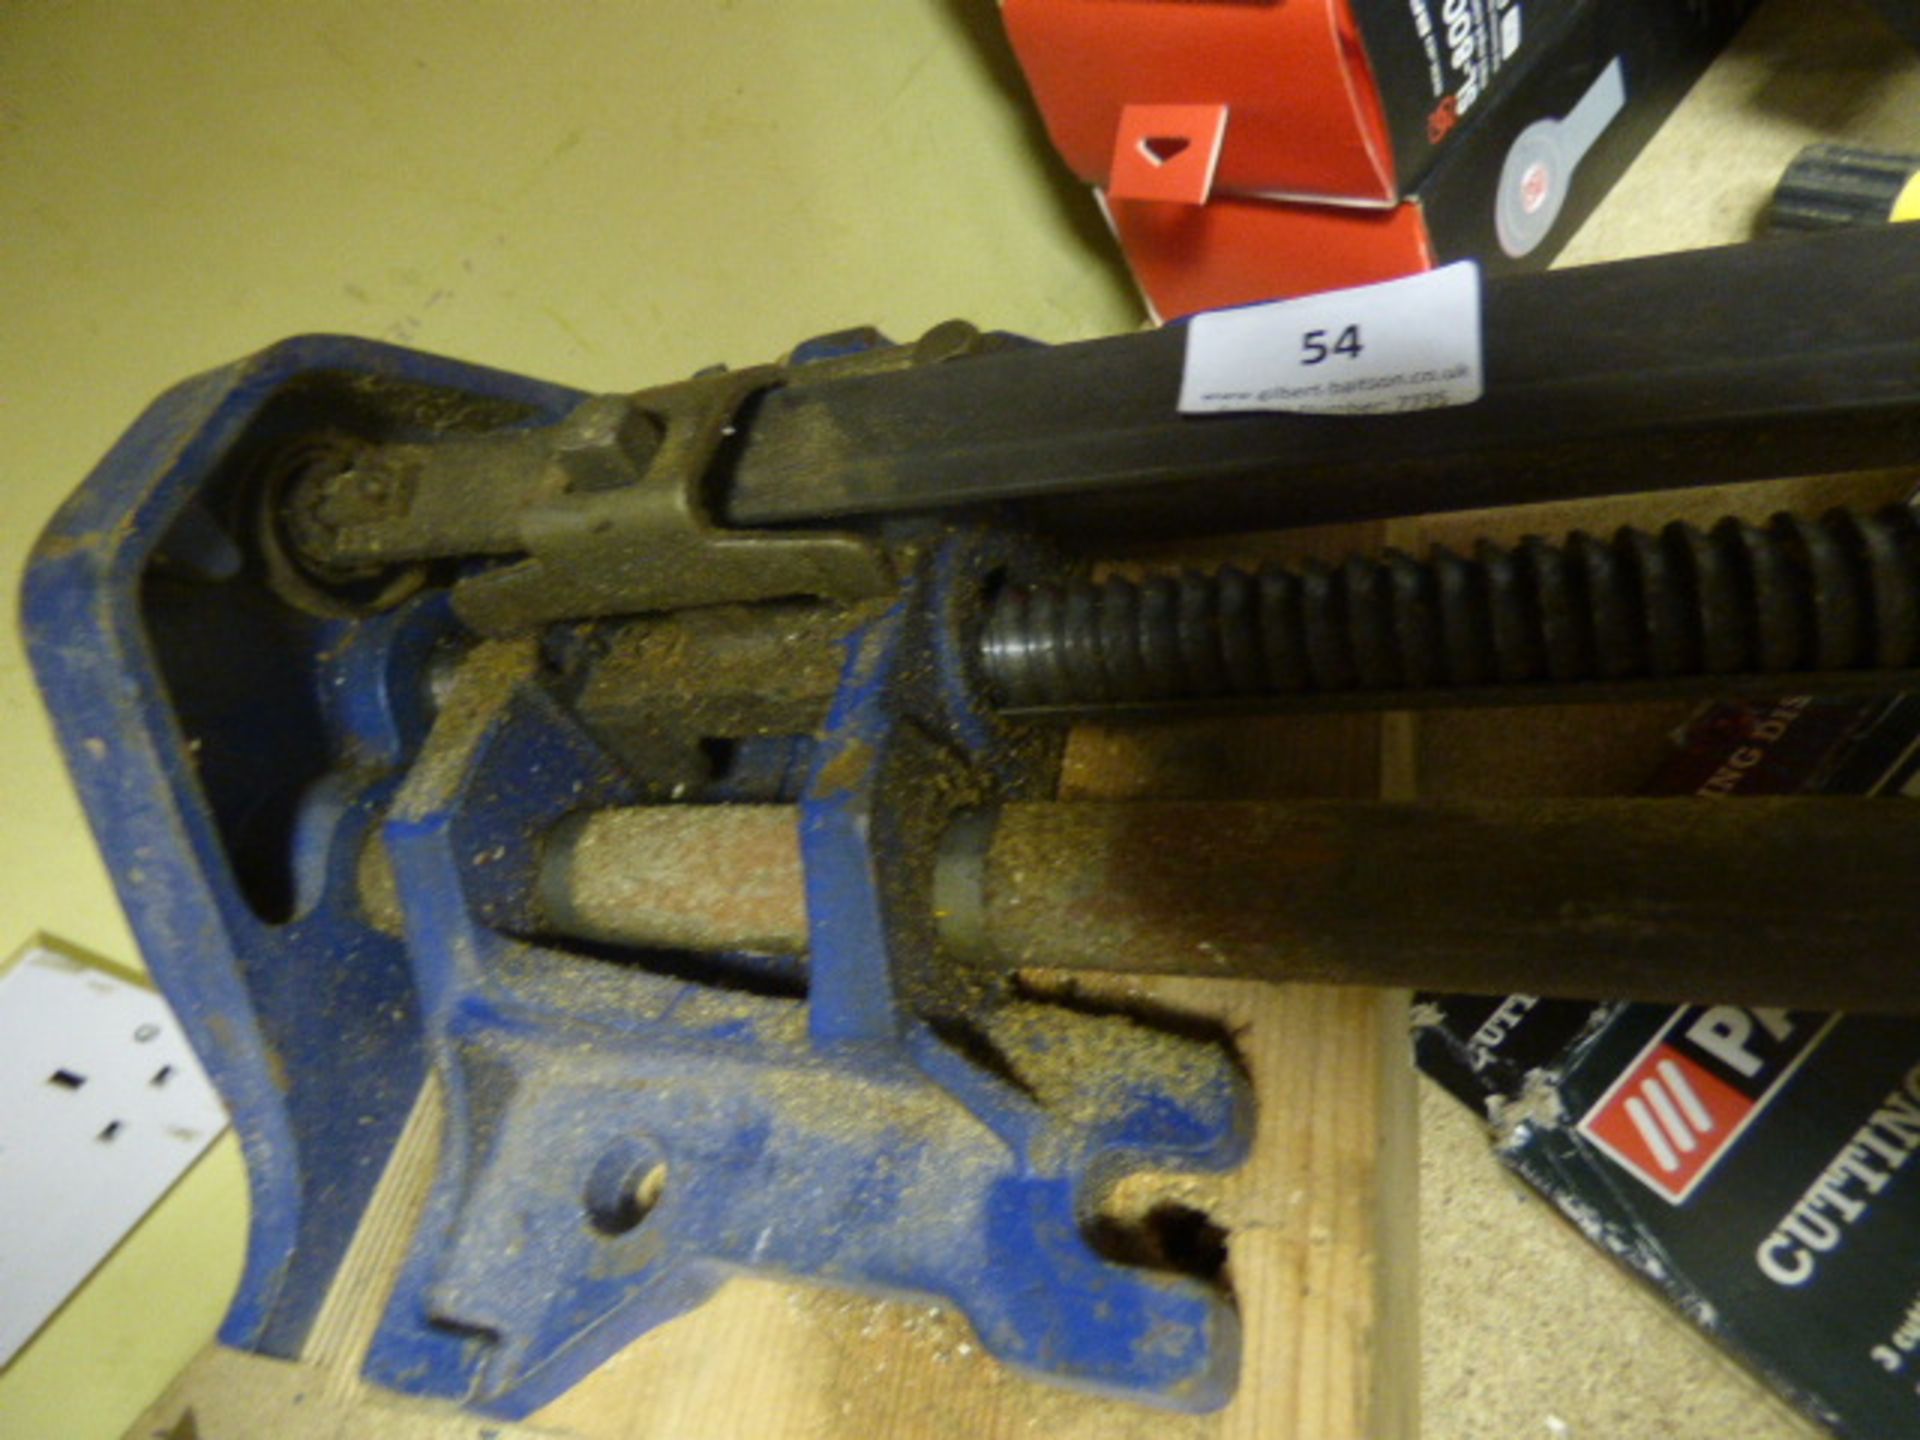 Record Quick Release Joiner's Vice